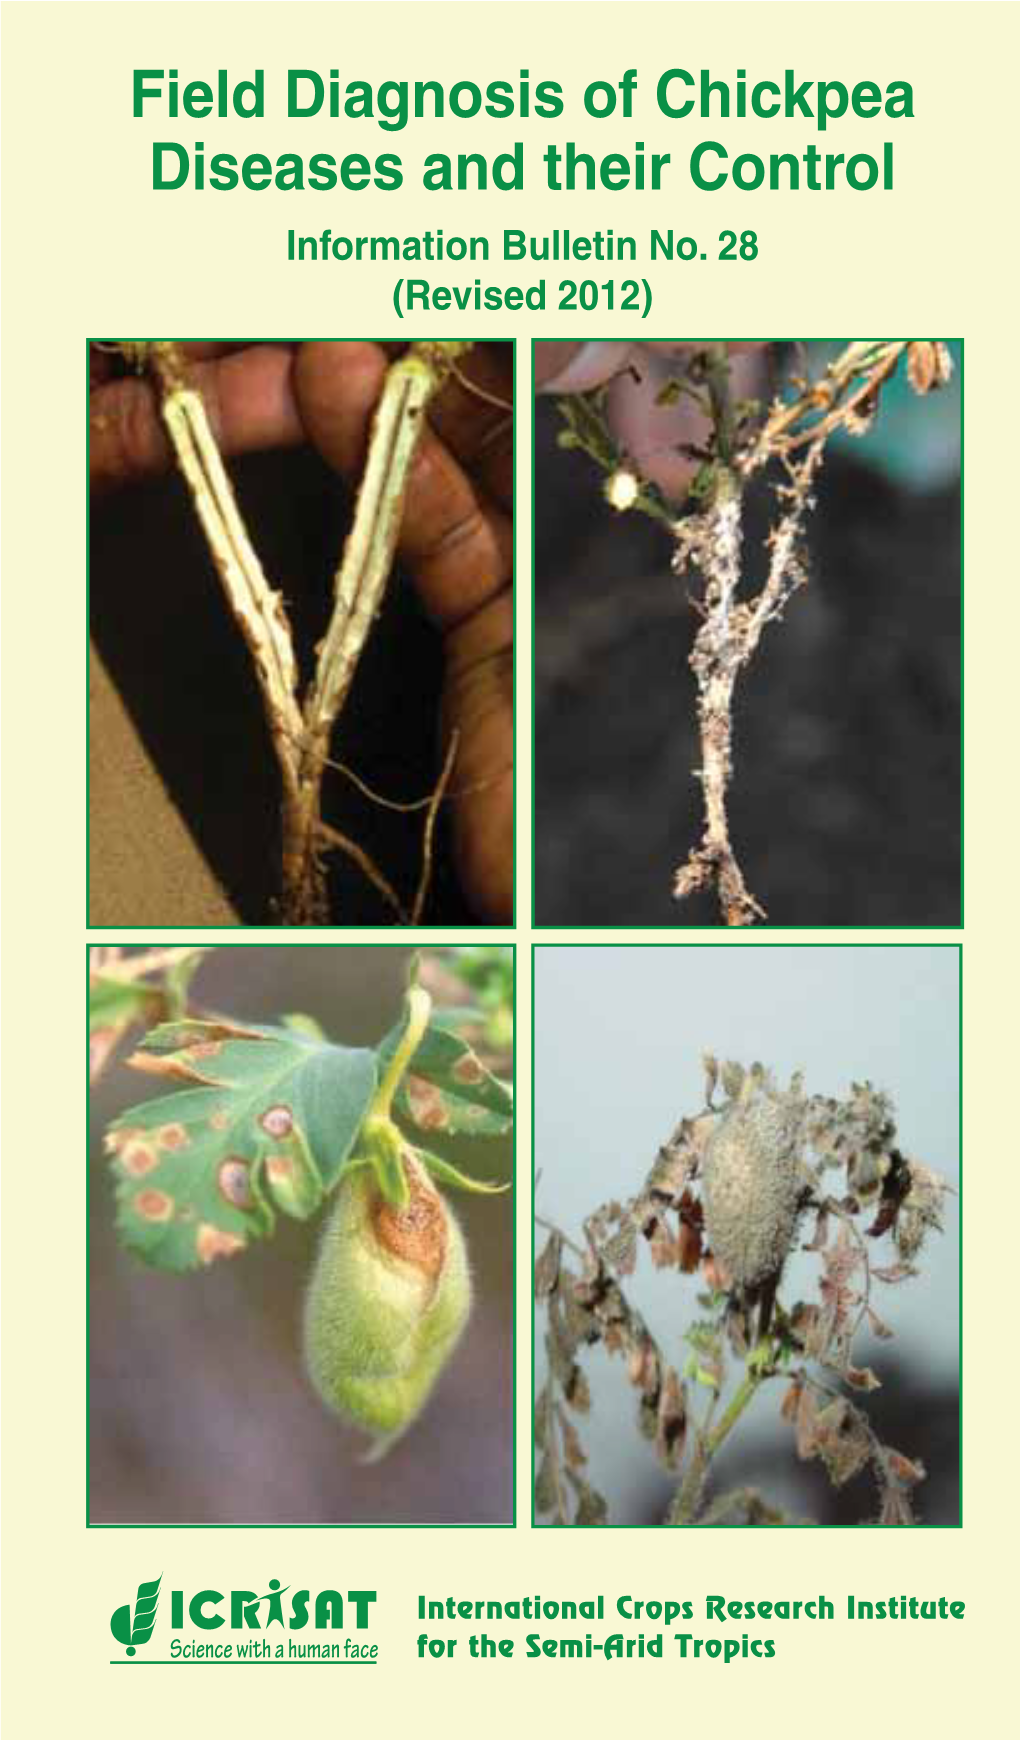 Field Diagnosis of Chickpea Diseases and Their Control Information Bulletin No